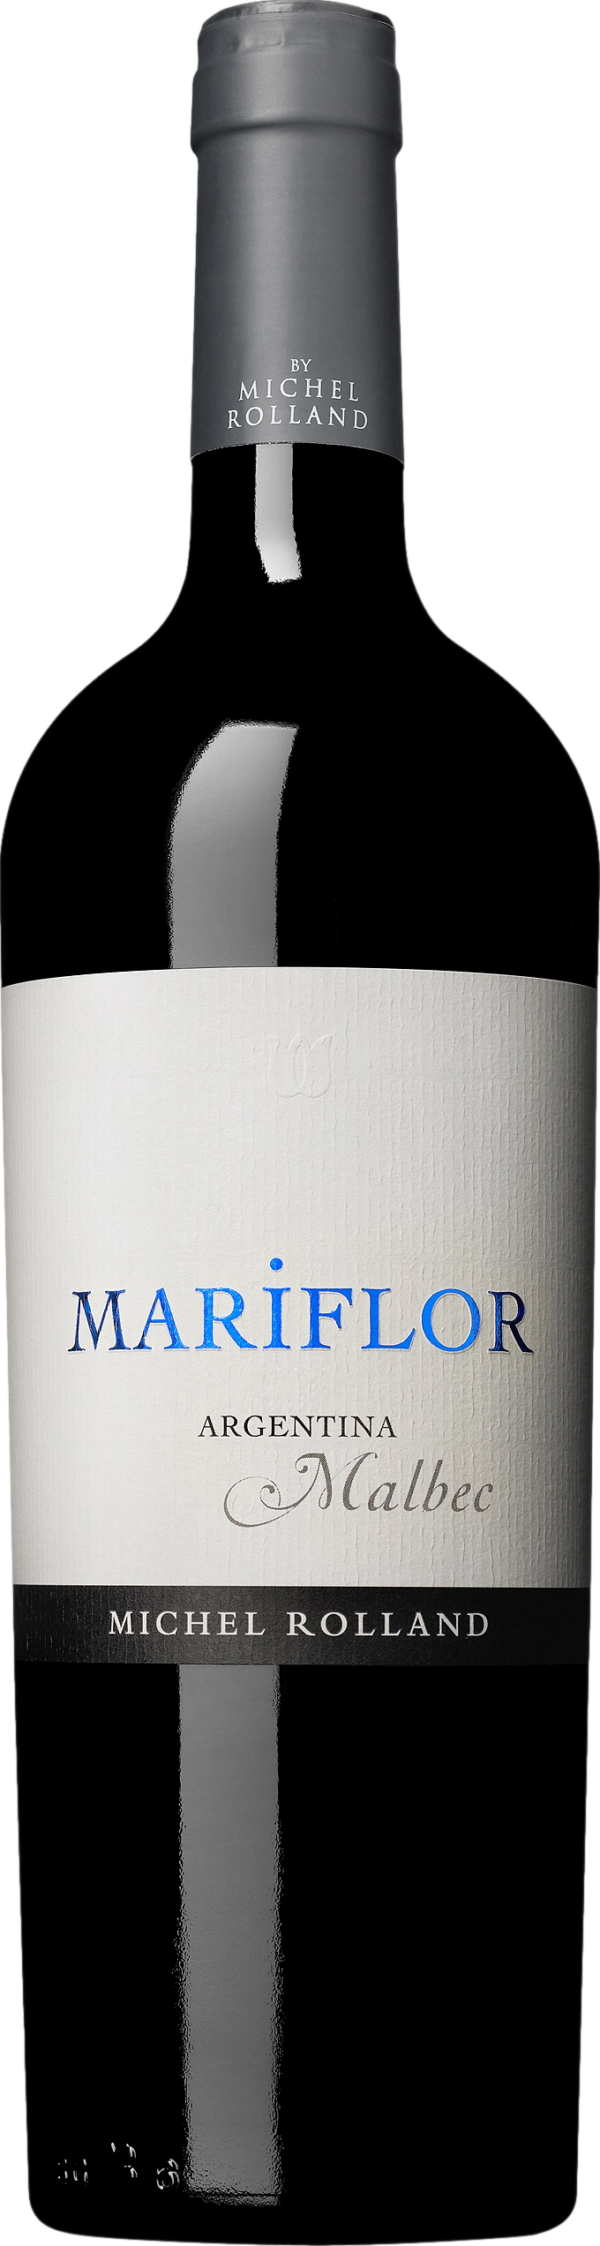 Product image of Michel Rolland Mariflor Malbec 2019 from 8wines